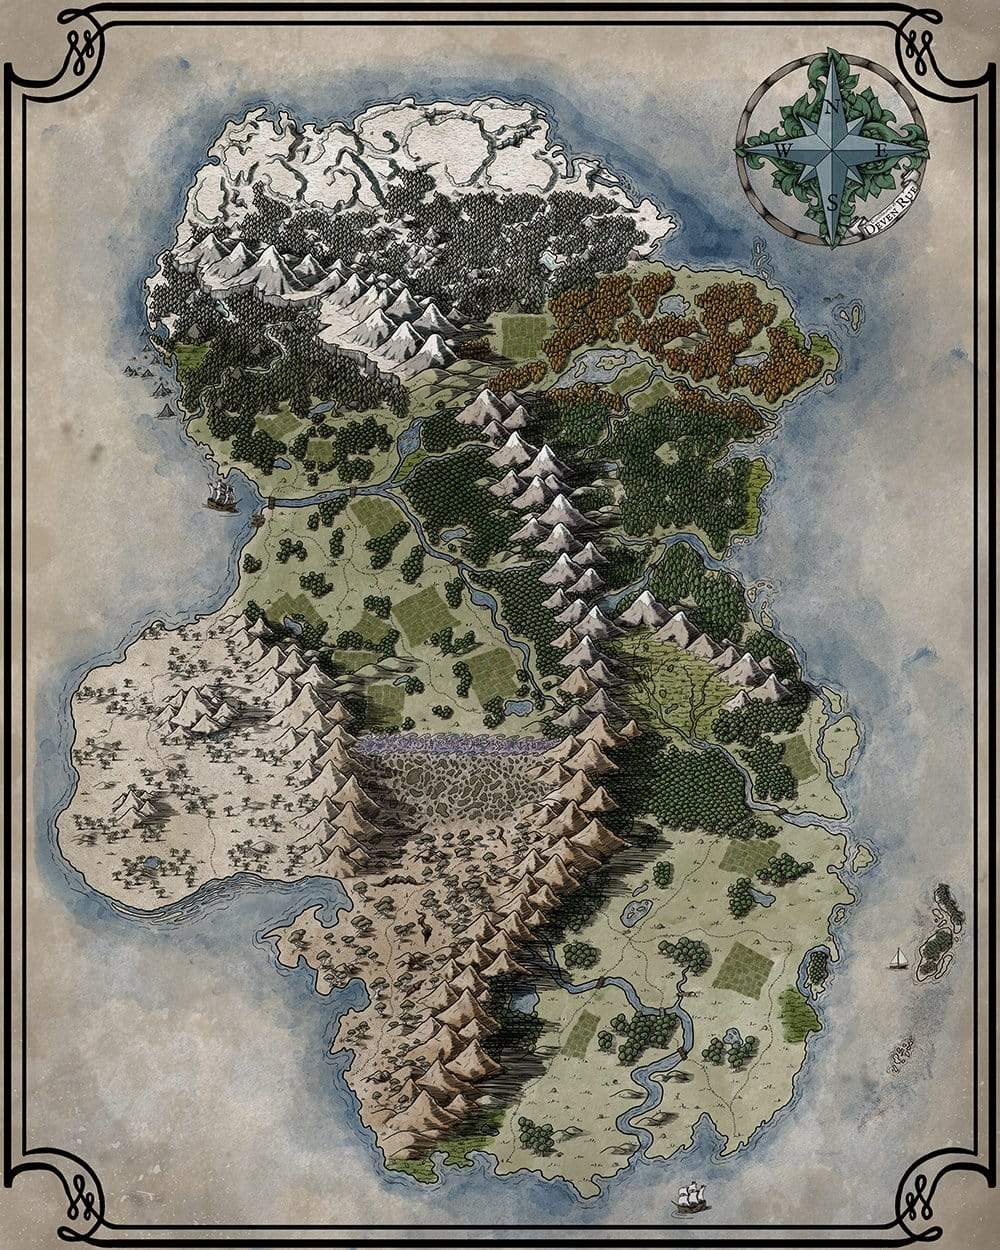 The Vendras Map with no labels by Deven Rue.